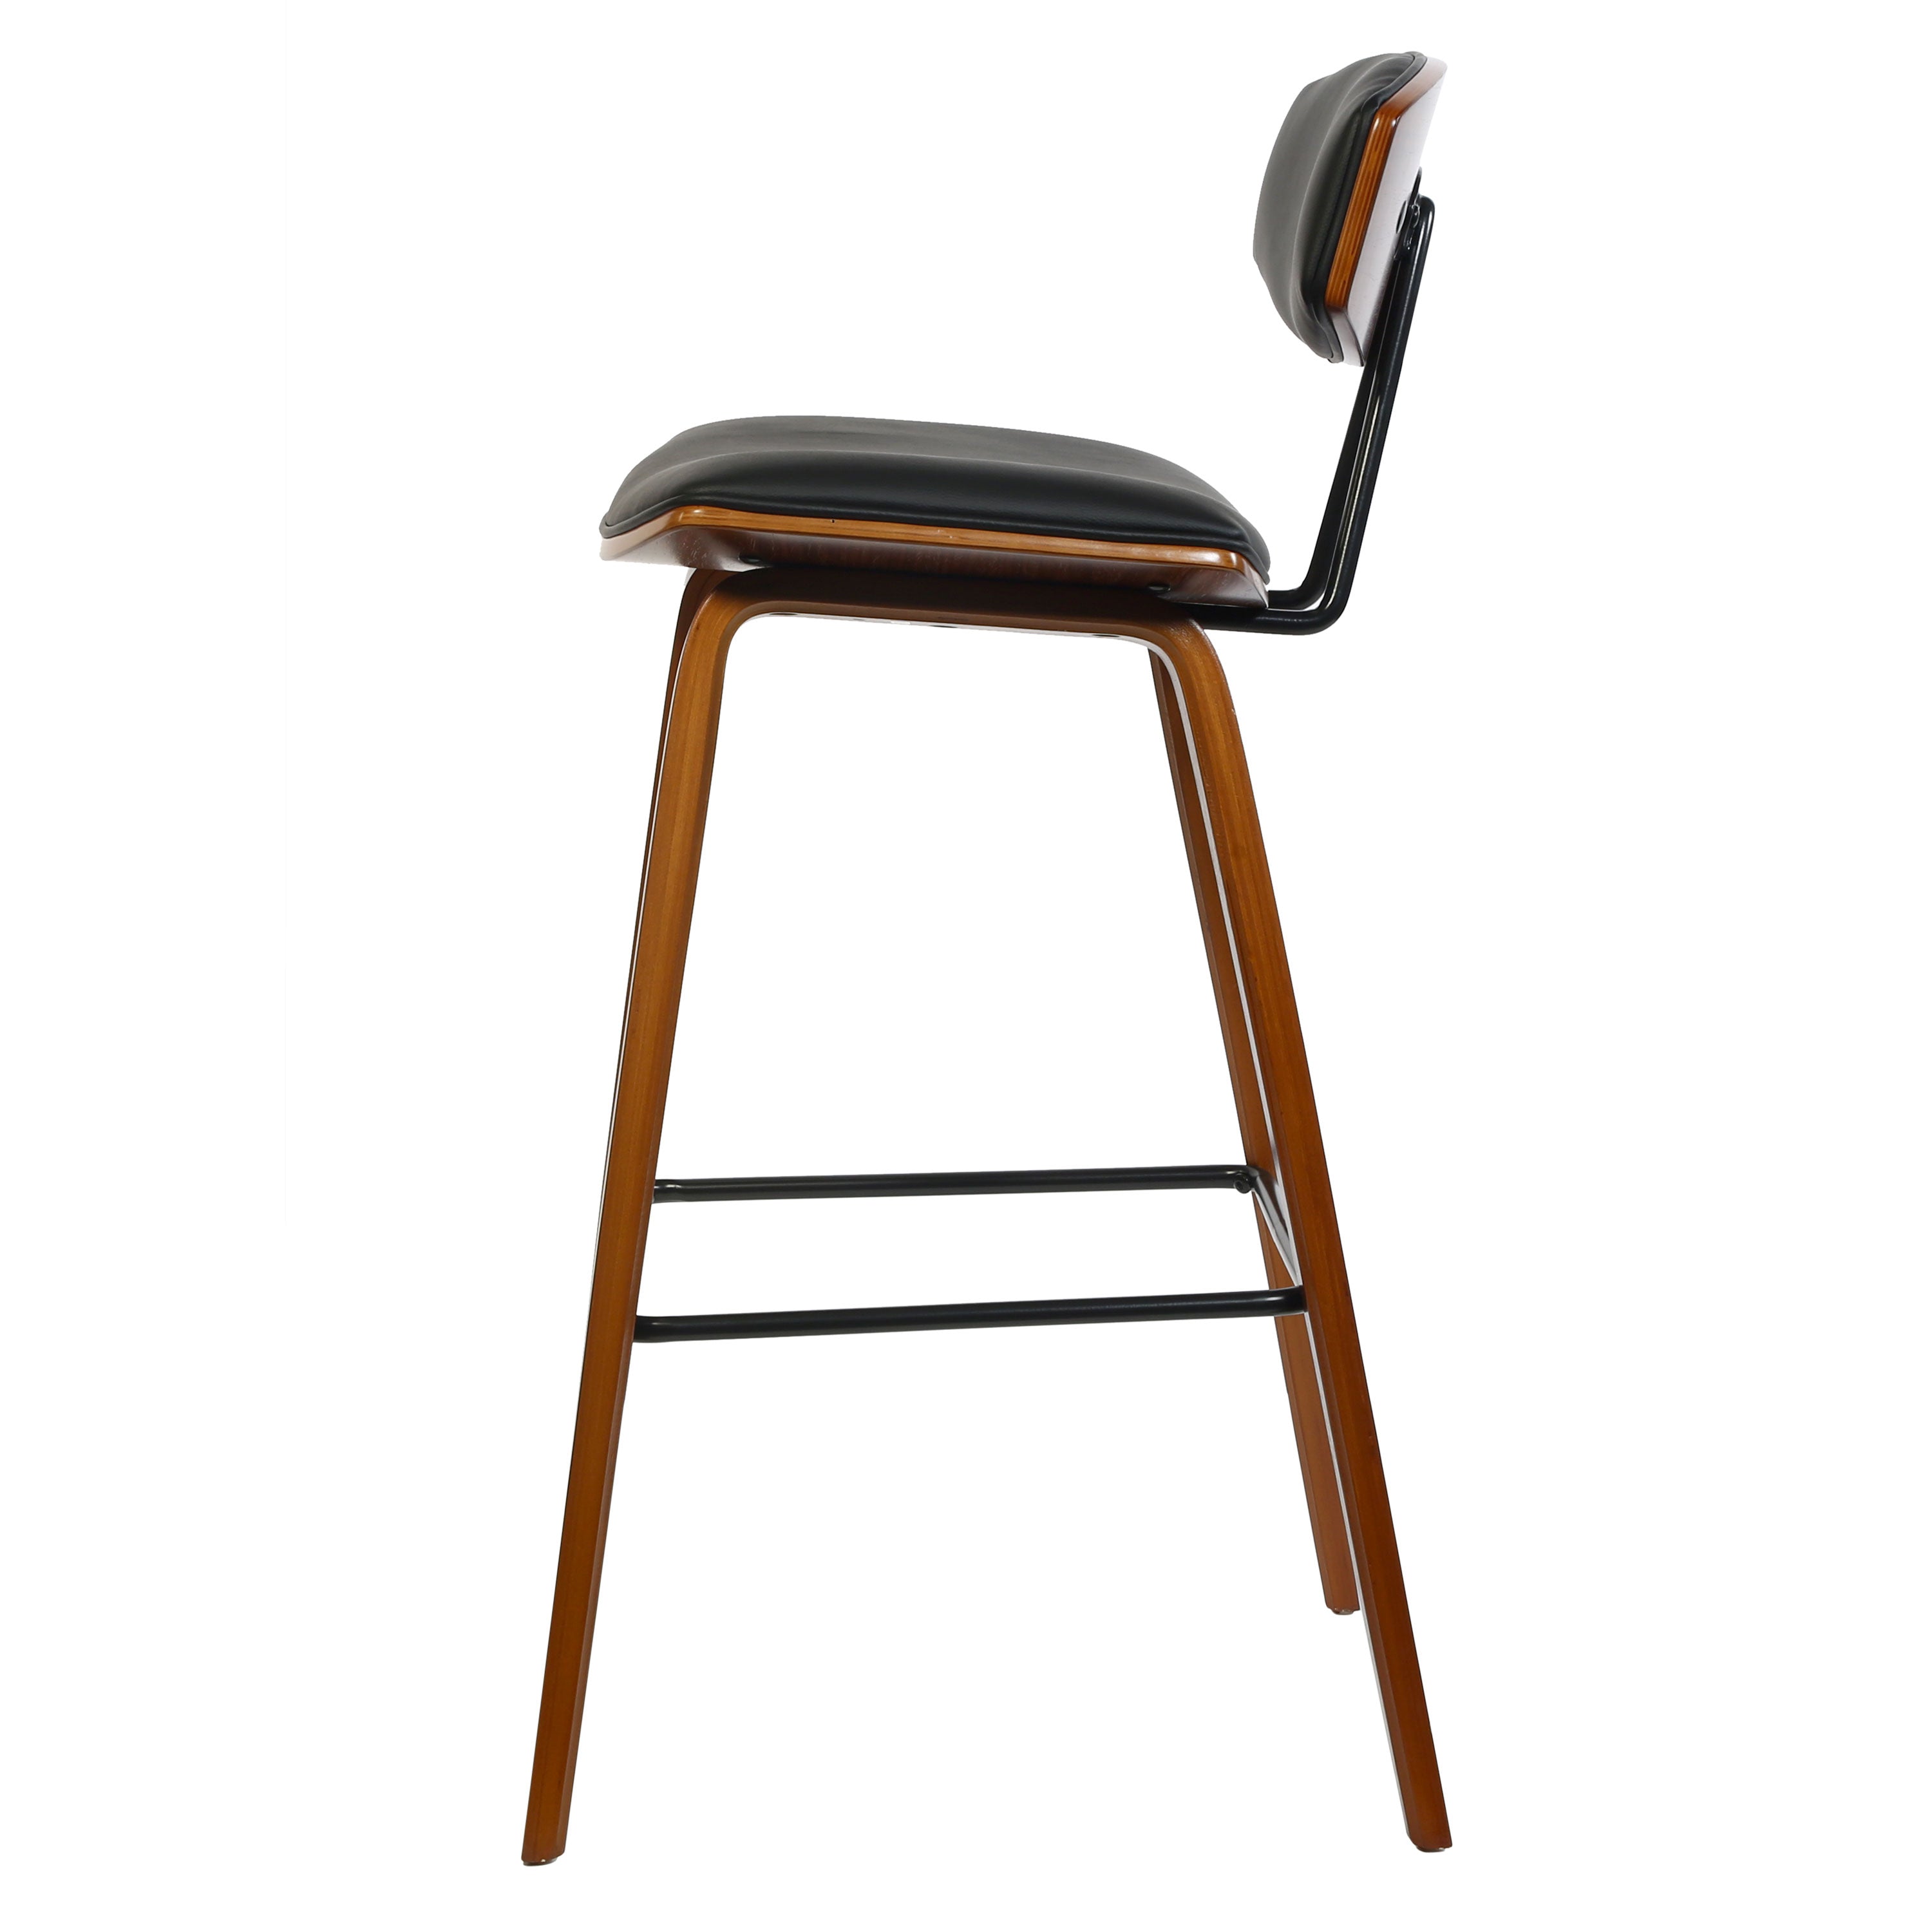 Dario High Wooden Barstool With Curvy Leather Seat And Backrest.